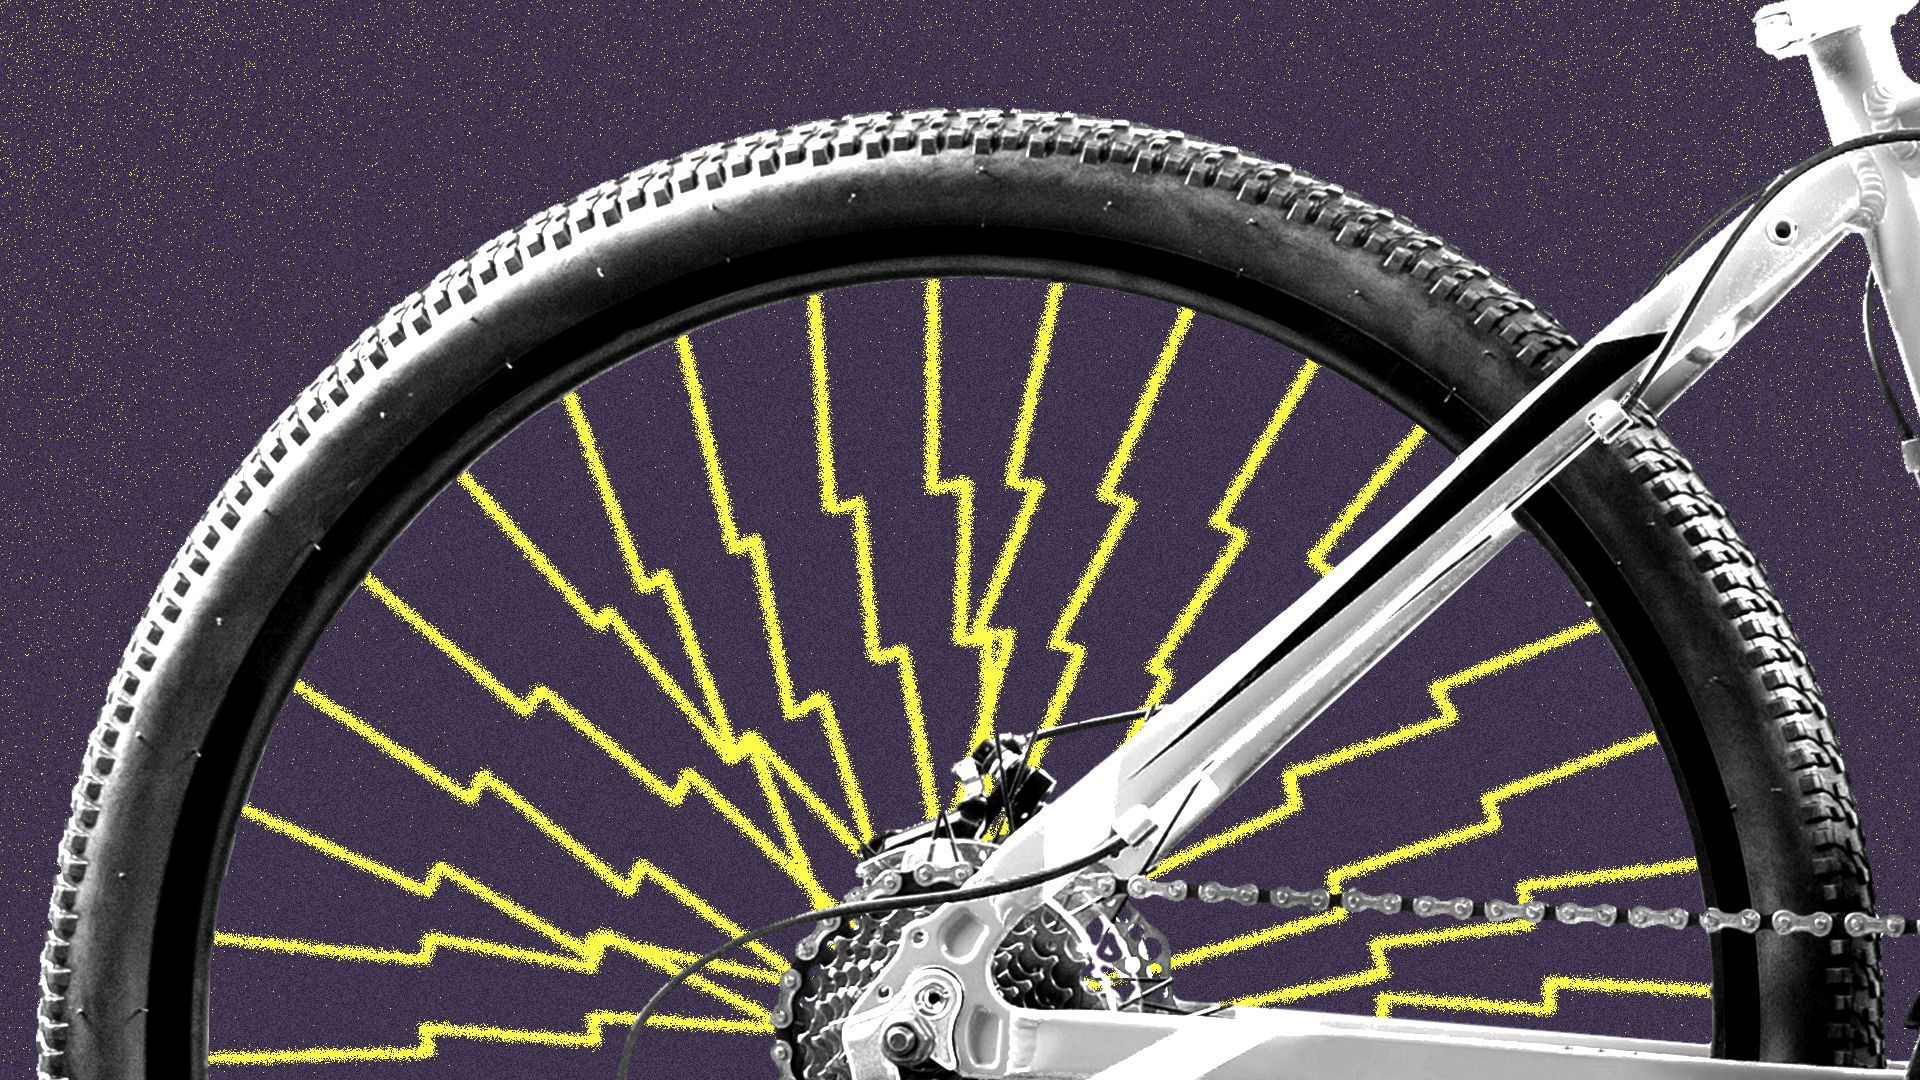 An illustration of a bicycle wheel with lighting bolts for spokes.